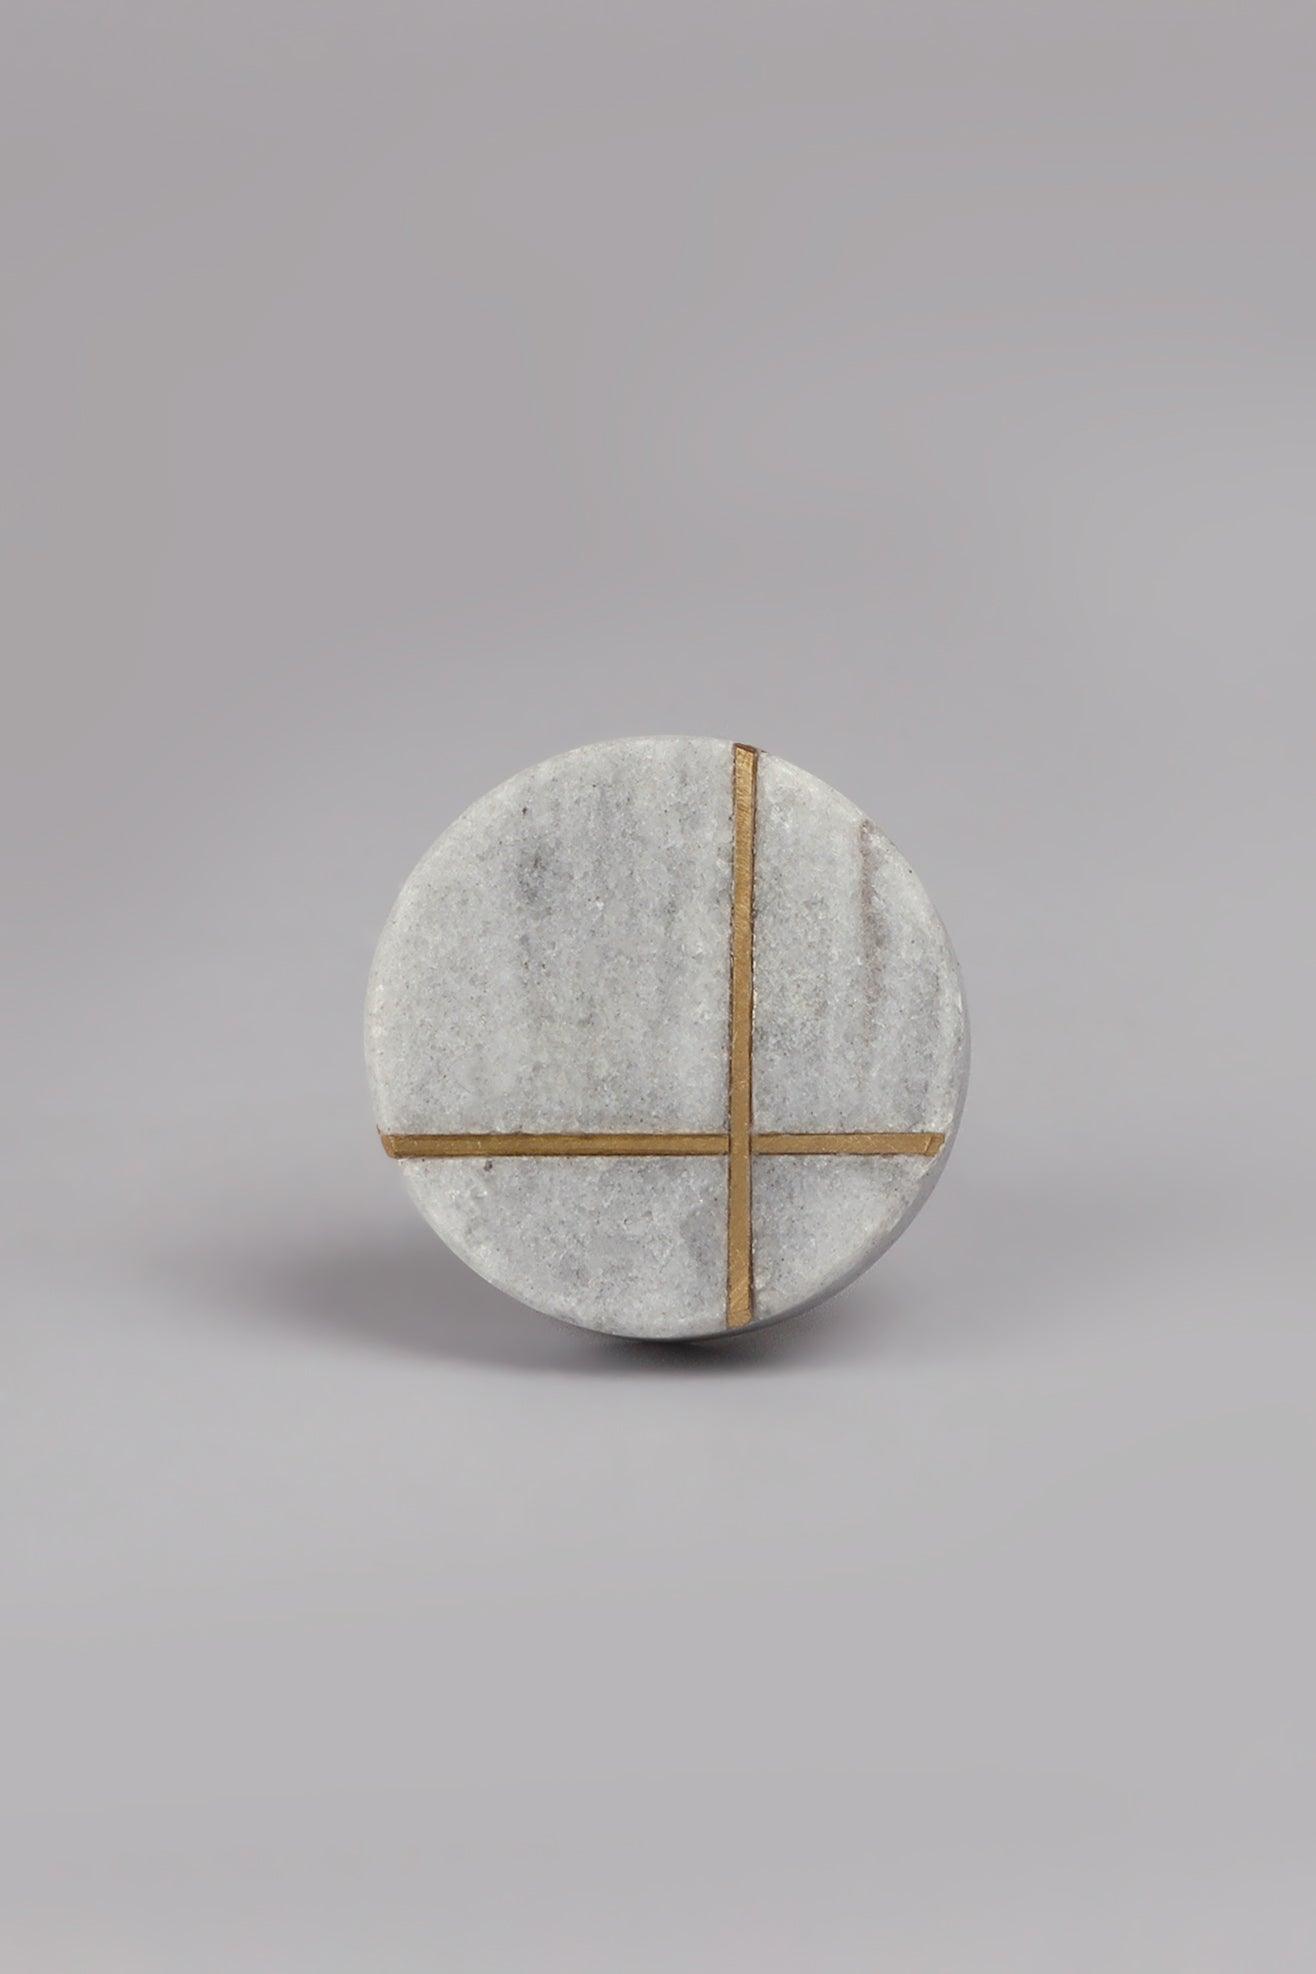 G Decor Cabinet Knobs & Handles Grey with cross / White Estella Marble with Brass Round Pull Knobs